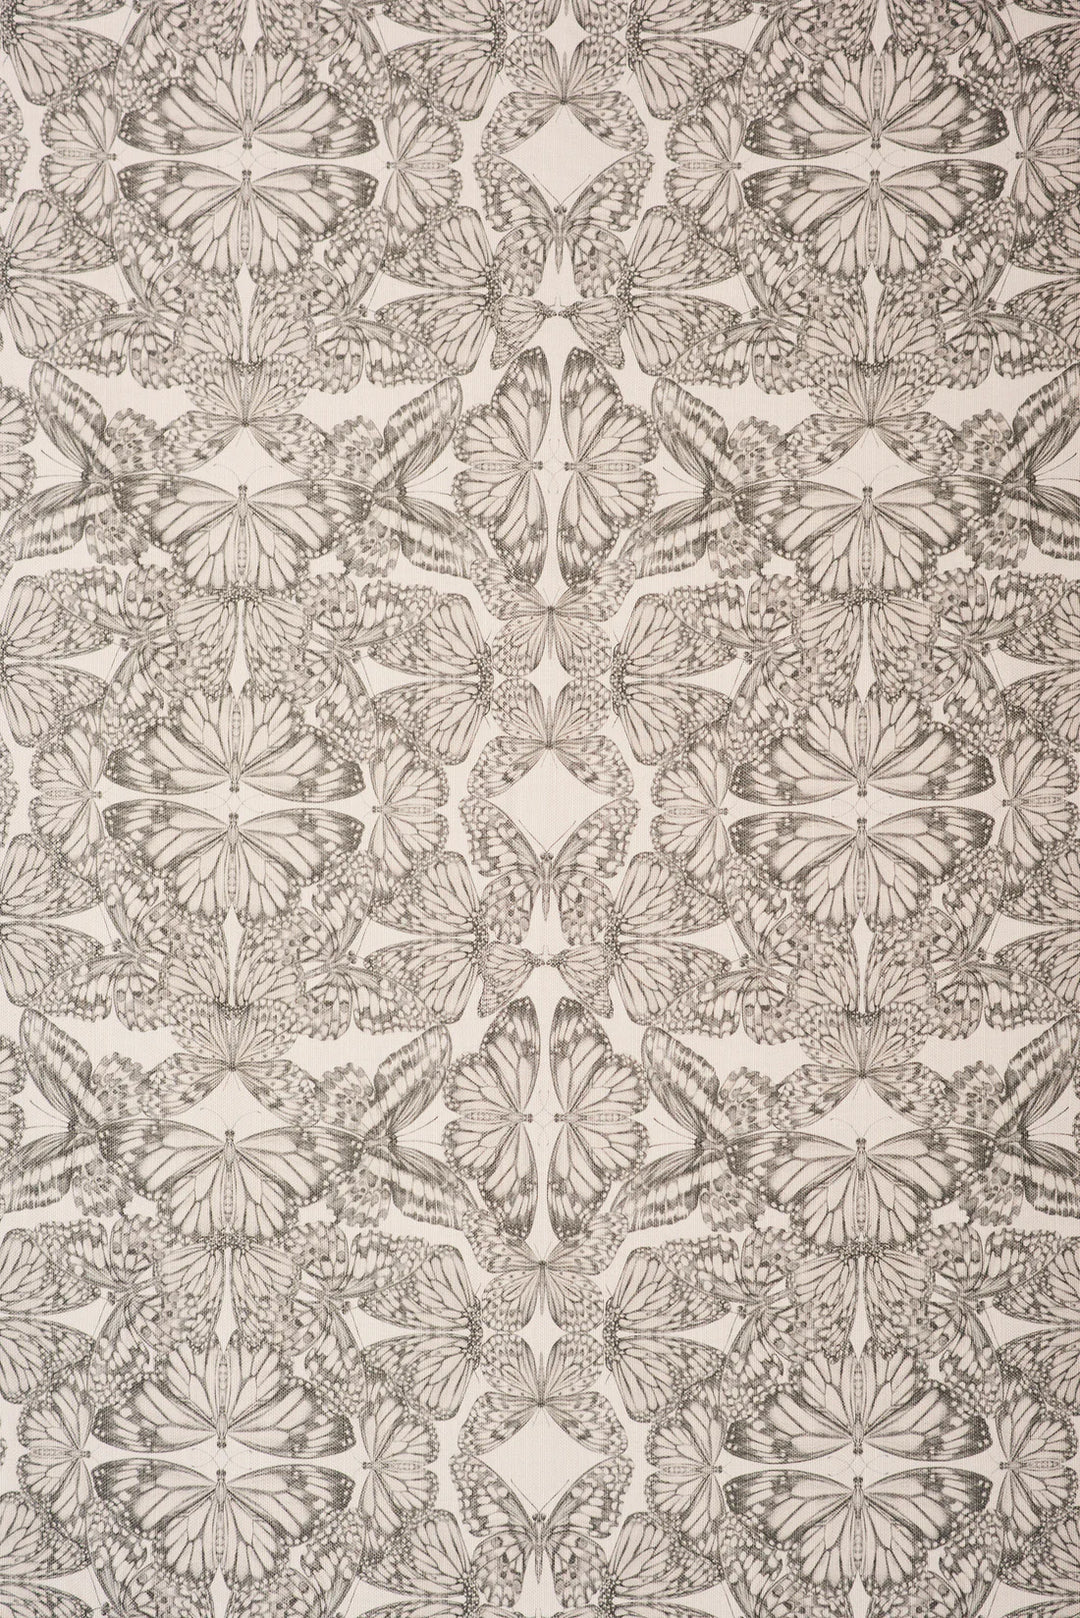 Victoria-sanders-Papilio-parchment-lonen-oyster-charcoal-hand-drawn-butterfly-print-kaleidoscopic-repeat